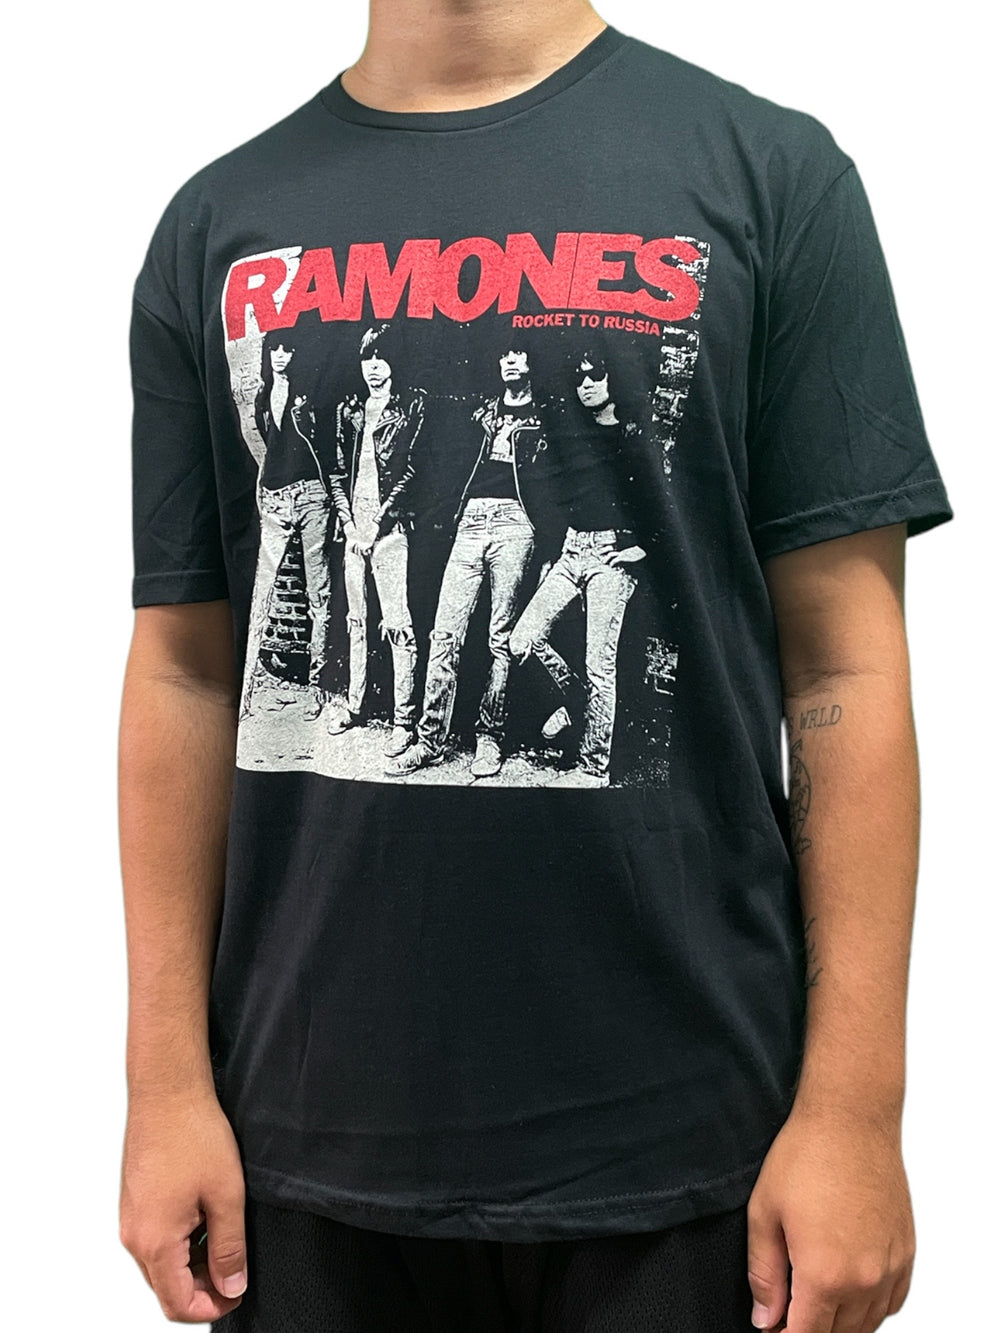 Ramones The  Rocket To Russia Unisex Official T Shirt Brand New Various Sizes